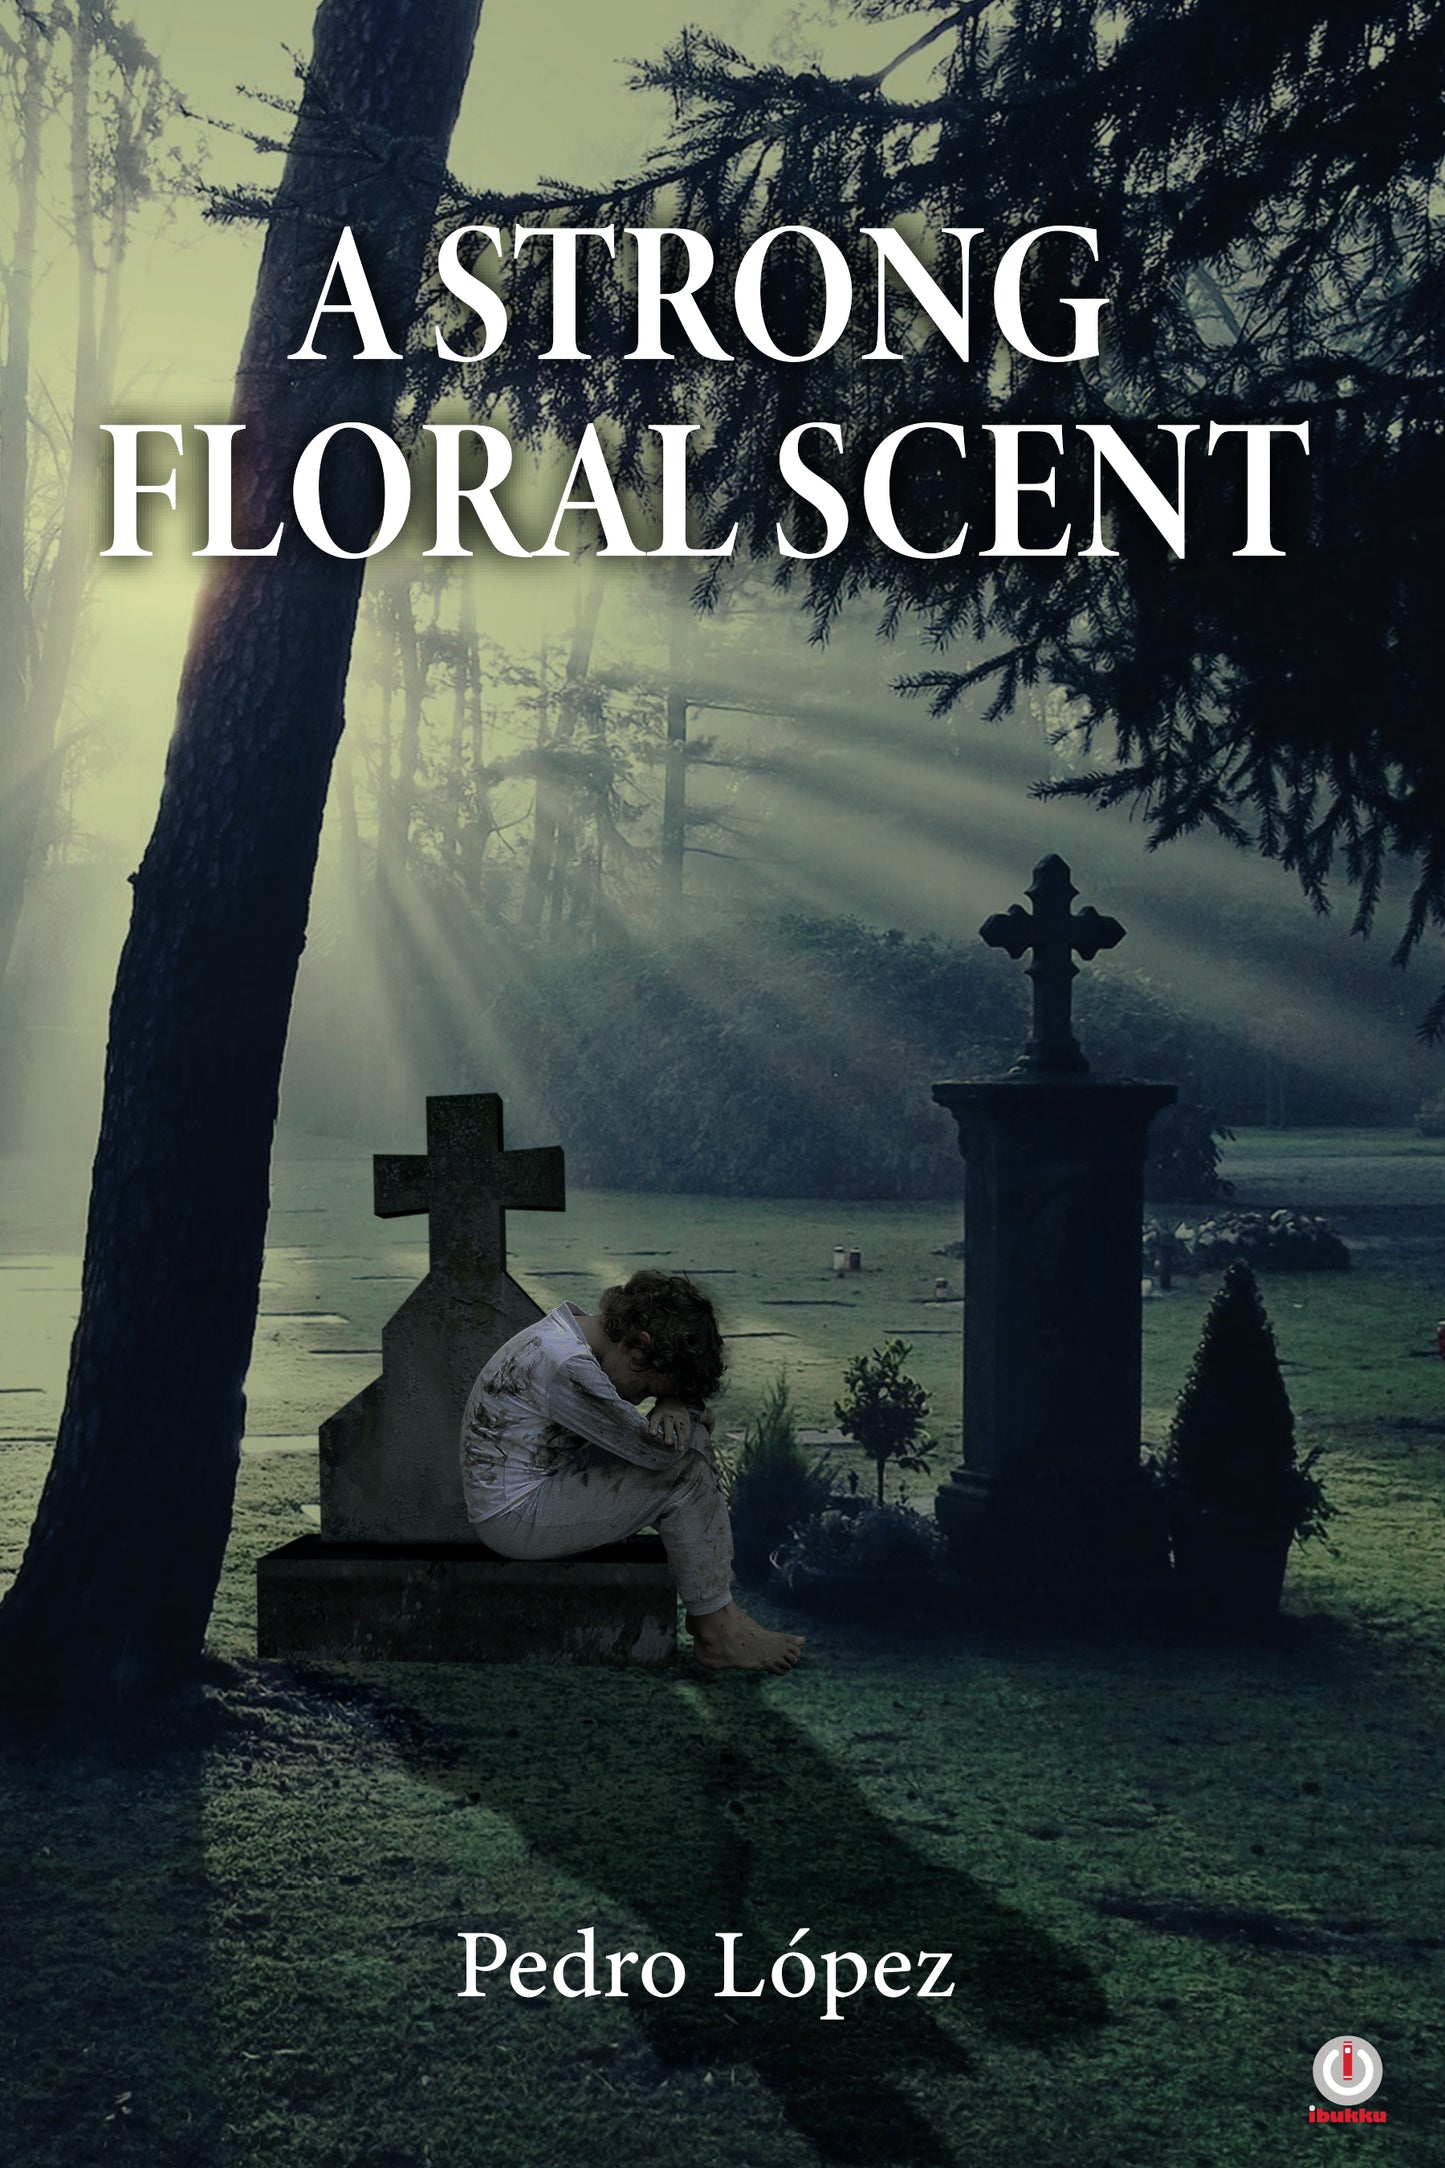 A Strong Floral Scent